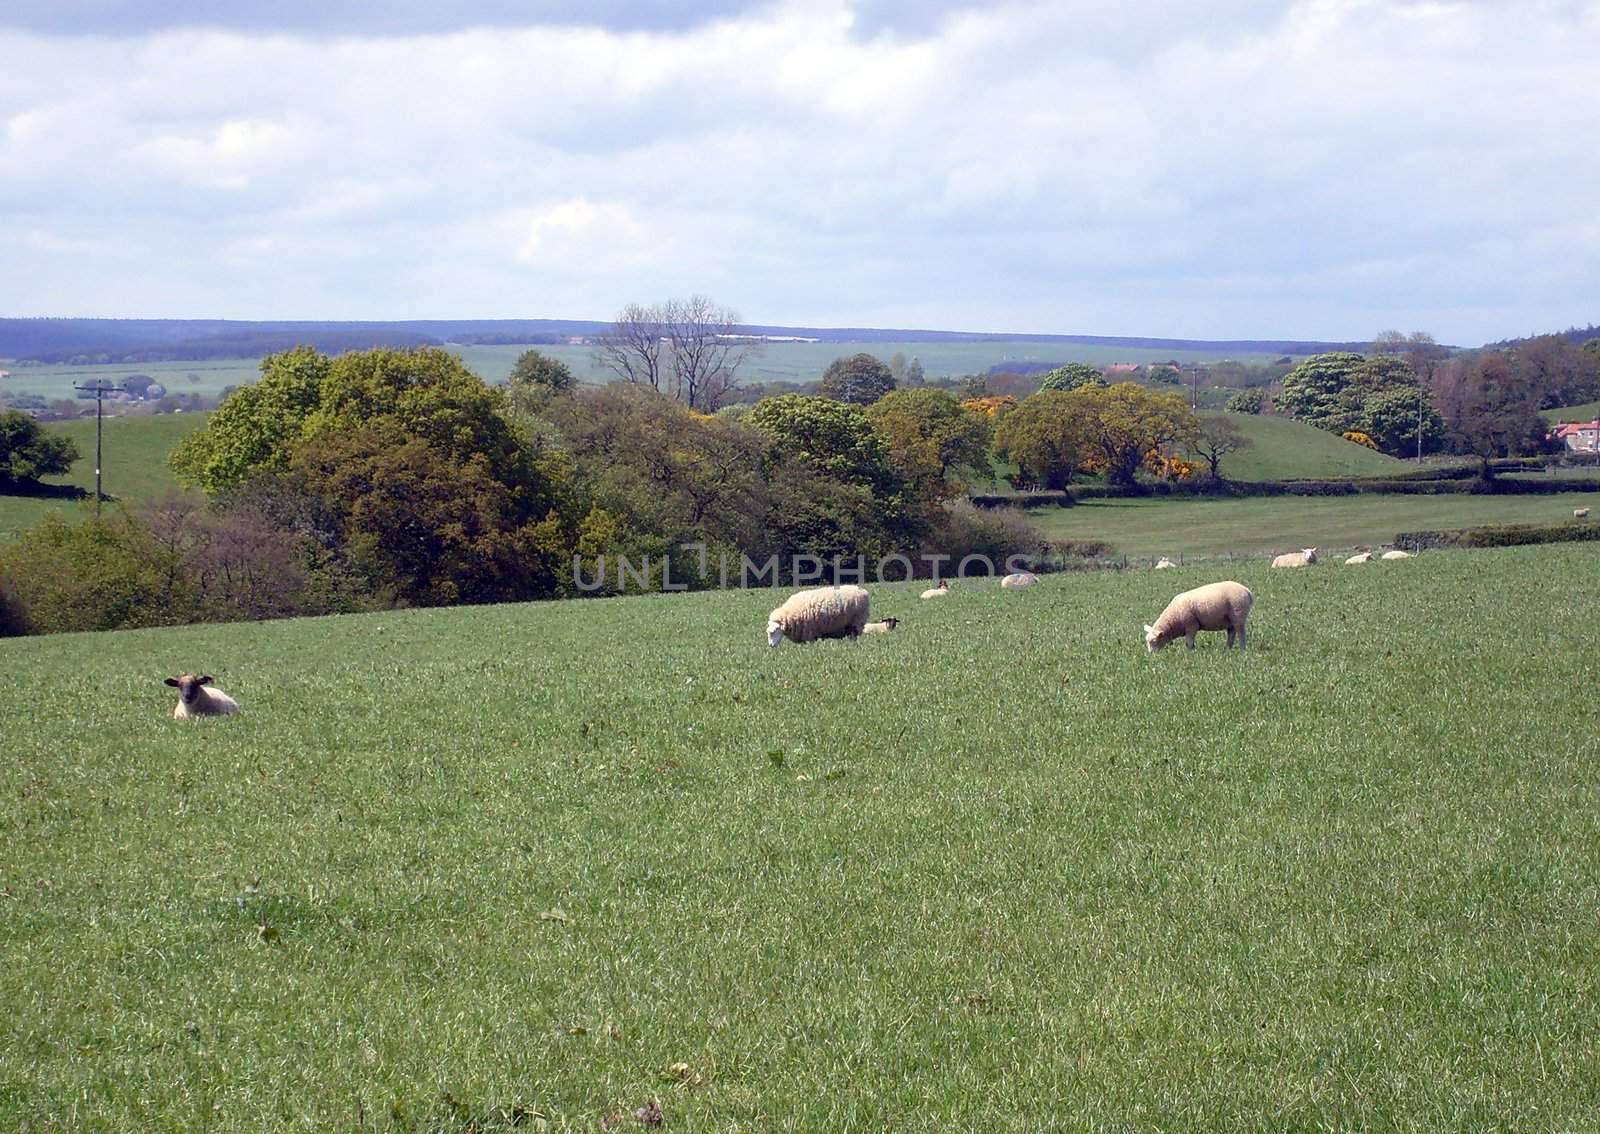 Sheep grazing in rural countryside landscape of North Yorkshire Moors National Park, England.